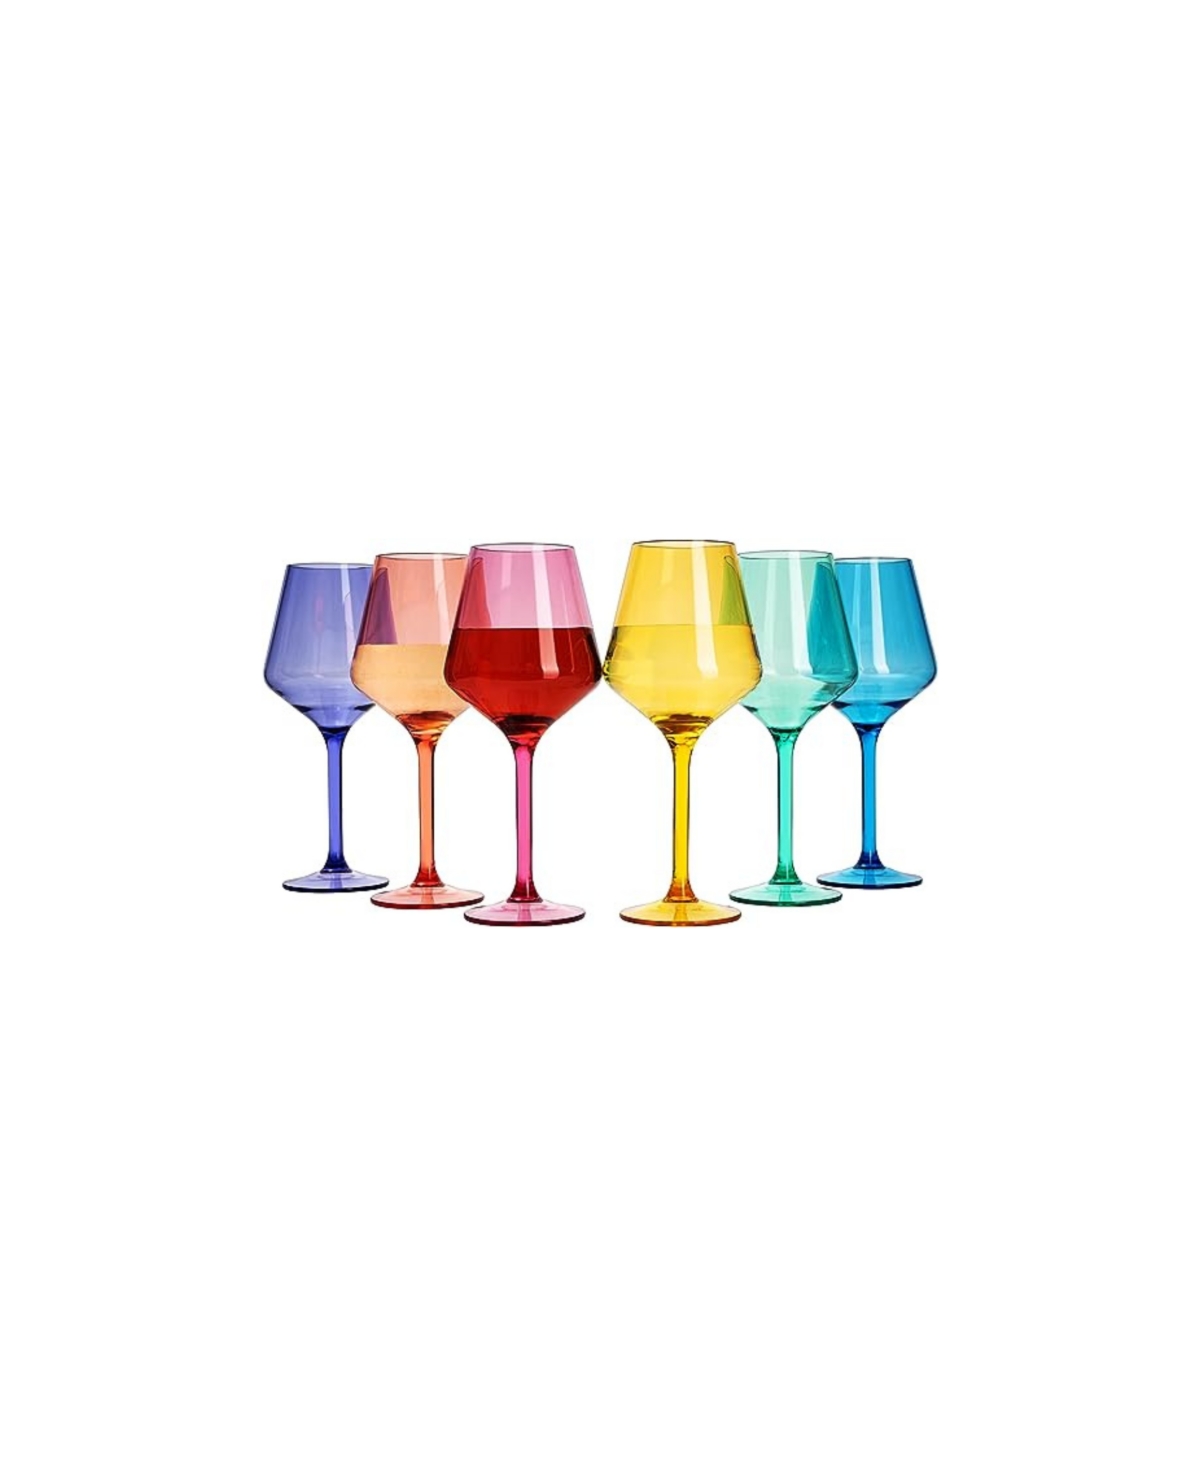 The Wine Savant Acrylic Colored European Style Crystal, Stemmed Wine Glasses, Acrylic Glasses, Set Of 6 In Multicolor